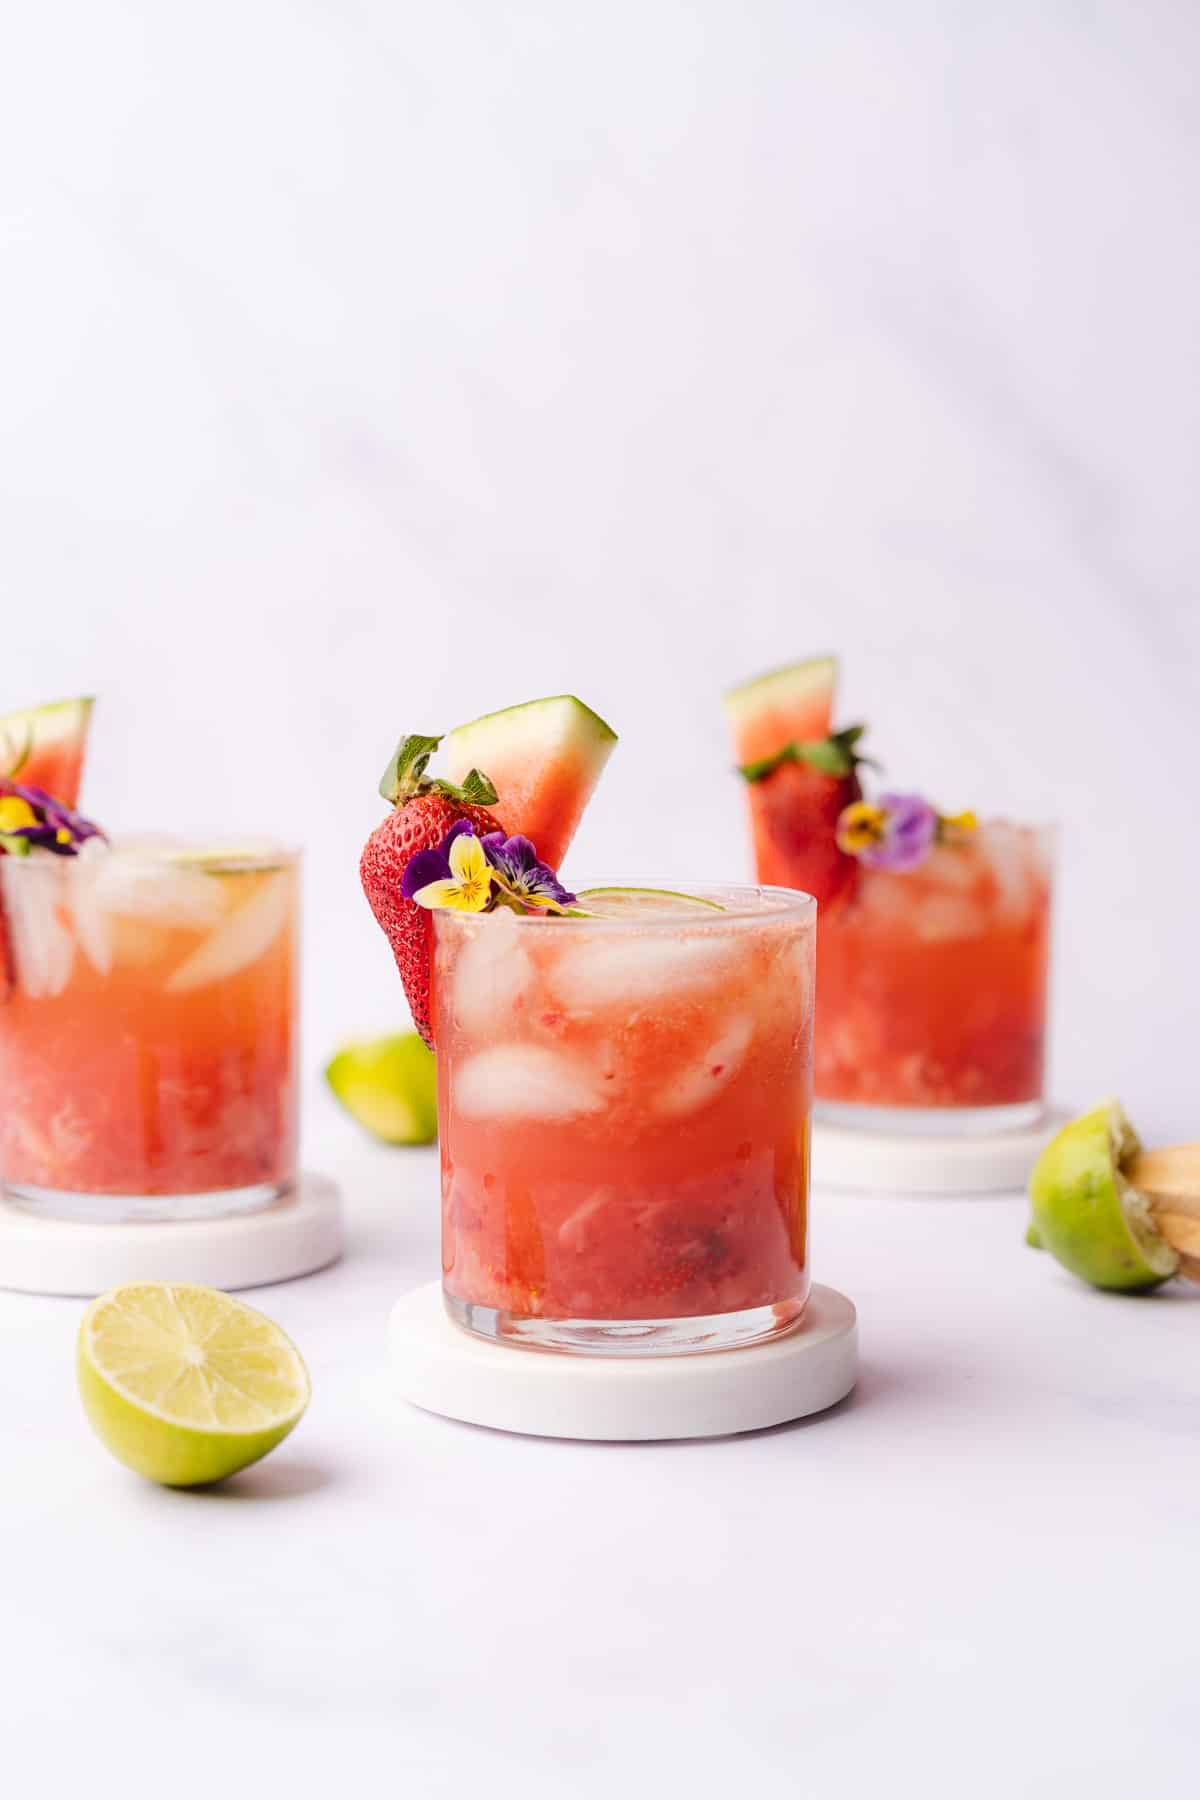 3 classes of watermelon wine spritzers with chunks of watermelon, juiced limes and edible flowers